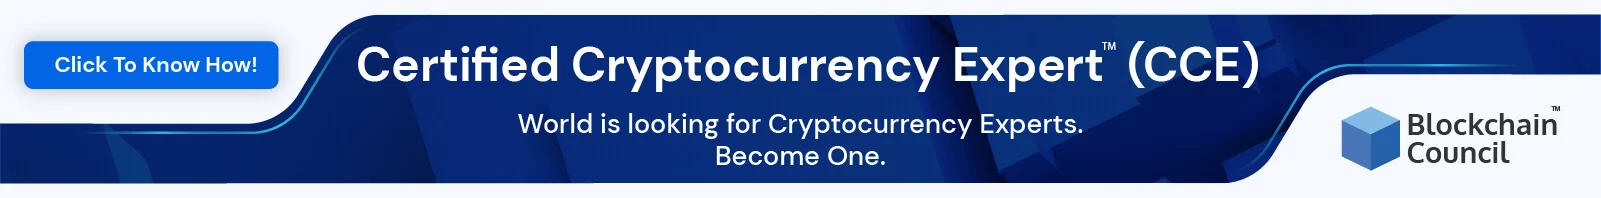 Cryptocurrency Investment Guide – Blockchain Council